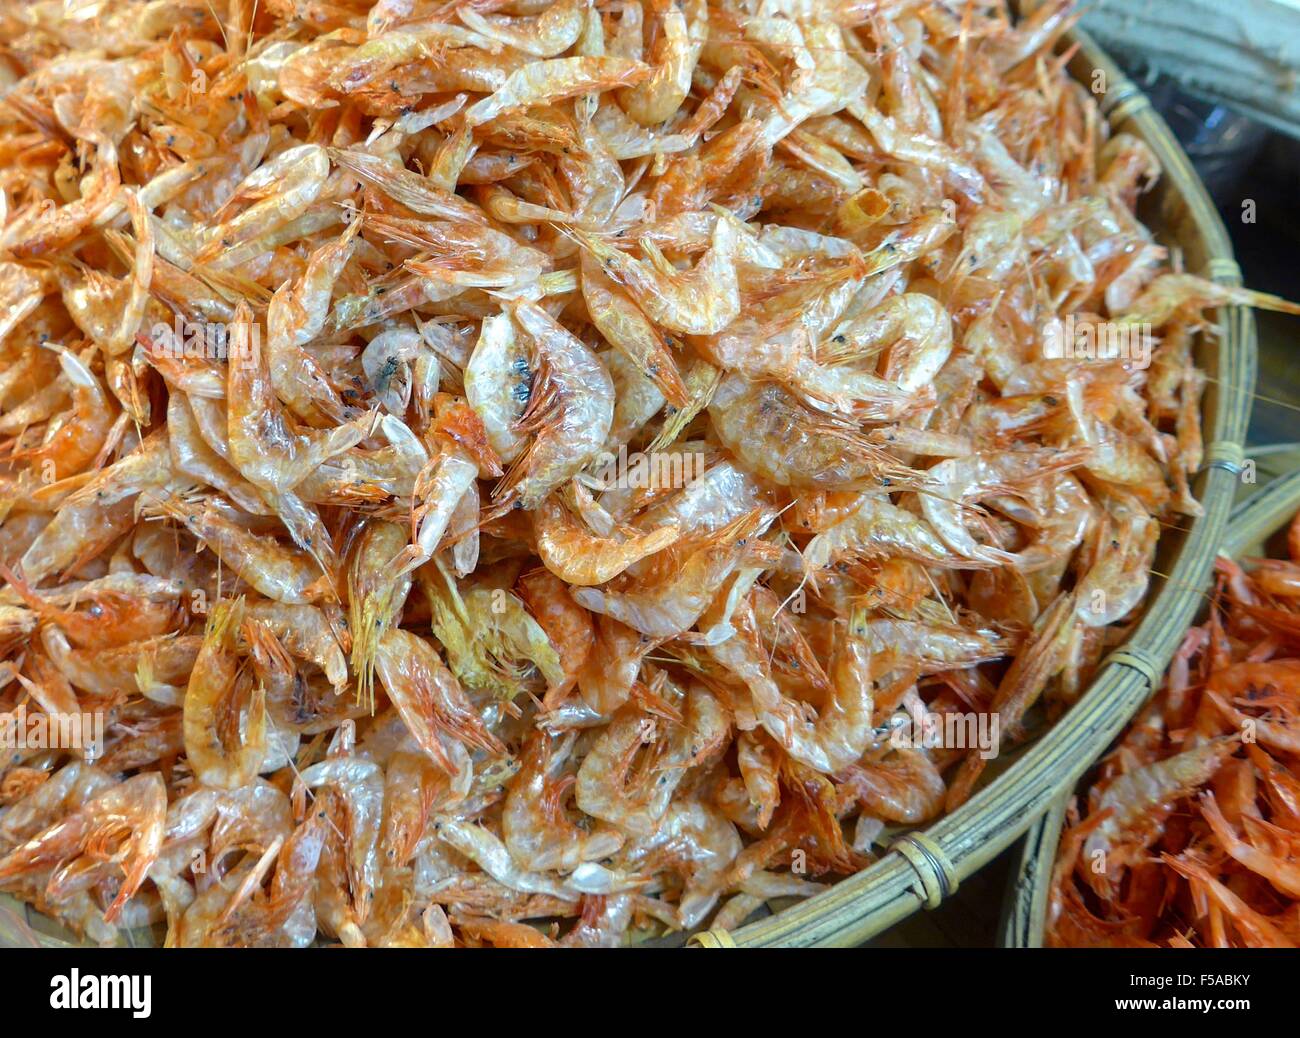 The closeup of dried shrimp in market Stock Photo